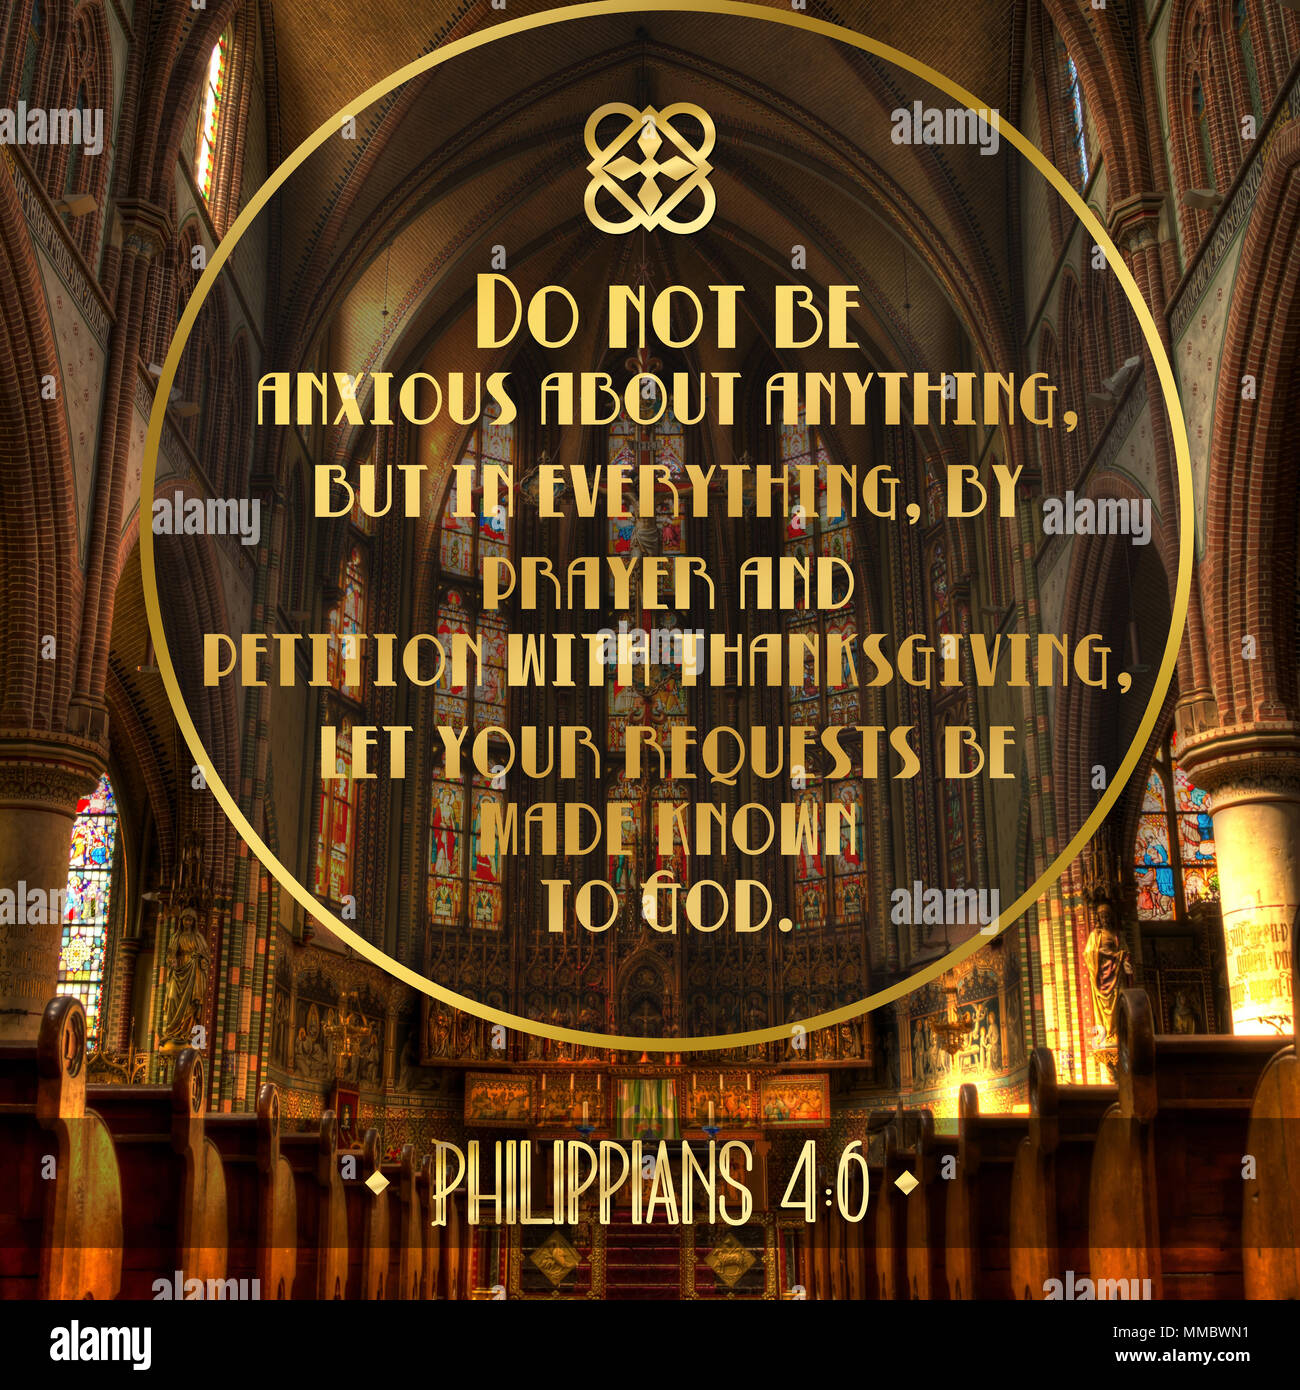 Do not be anxious about anything, but in everything, by prayer and petition  with thanksgiving, let your requests be made known to God. Philippians 4:6  Stock Photo - Alamy